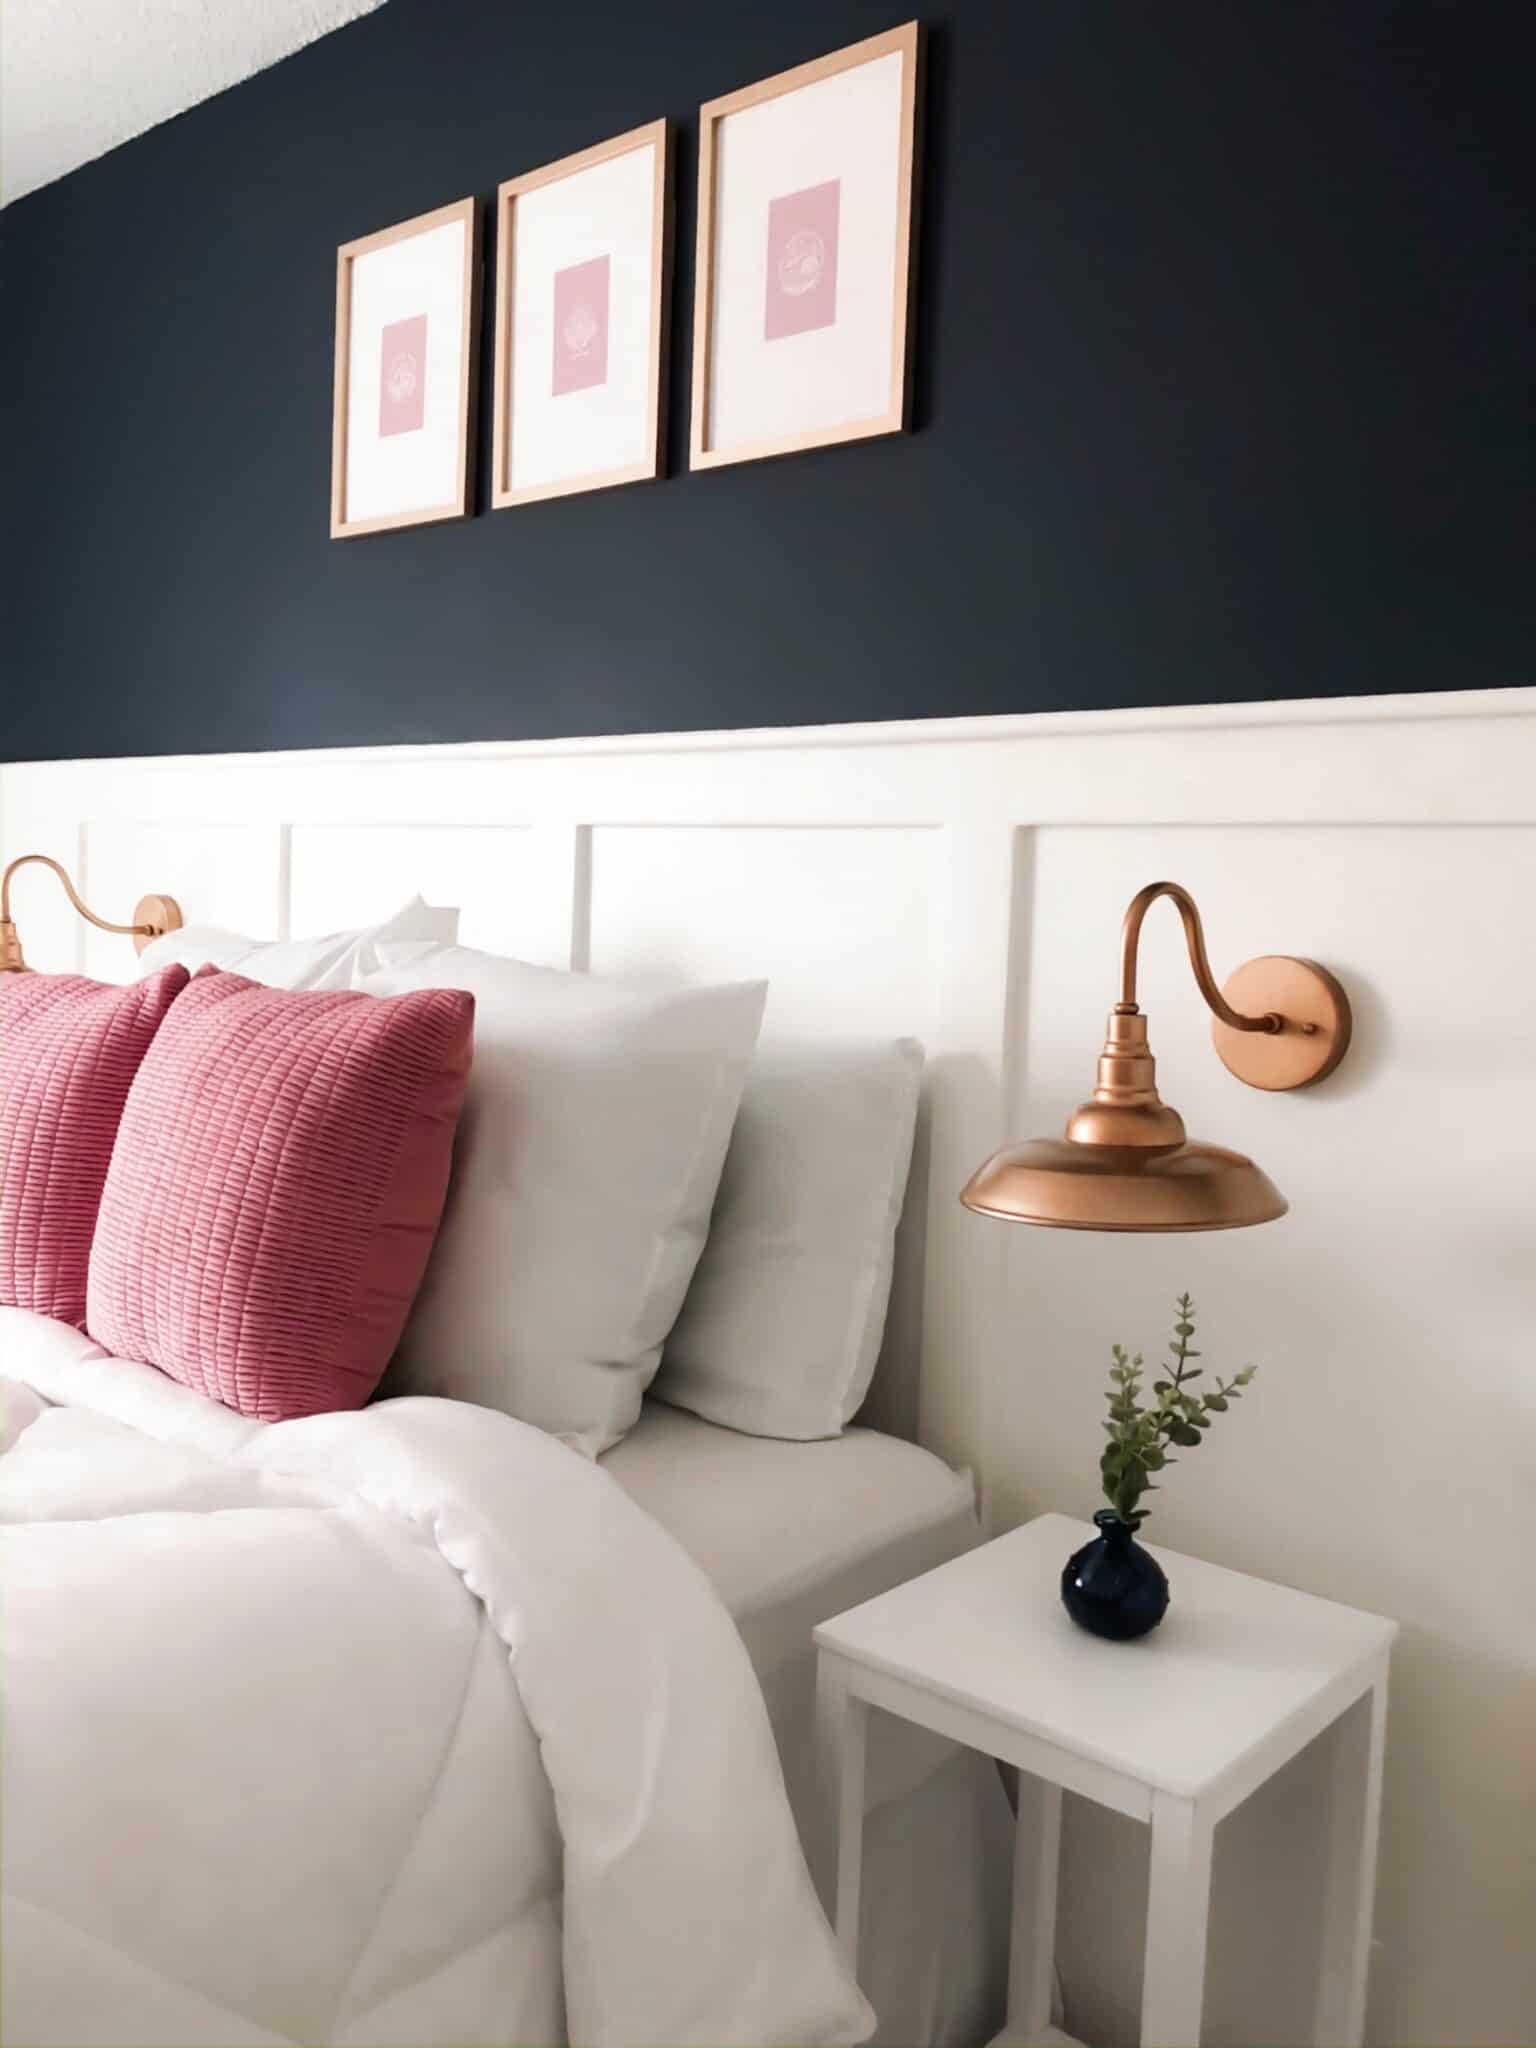 Master bedroom with navy blue walls